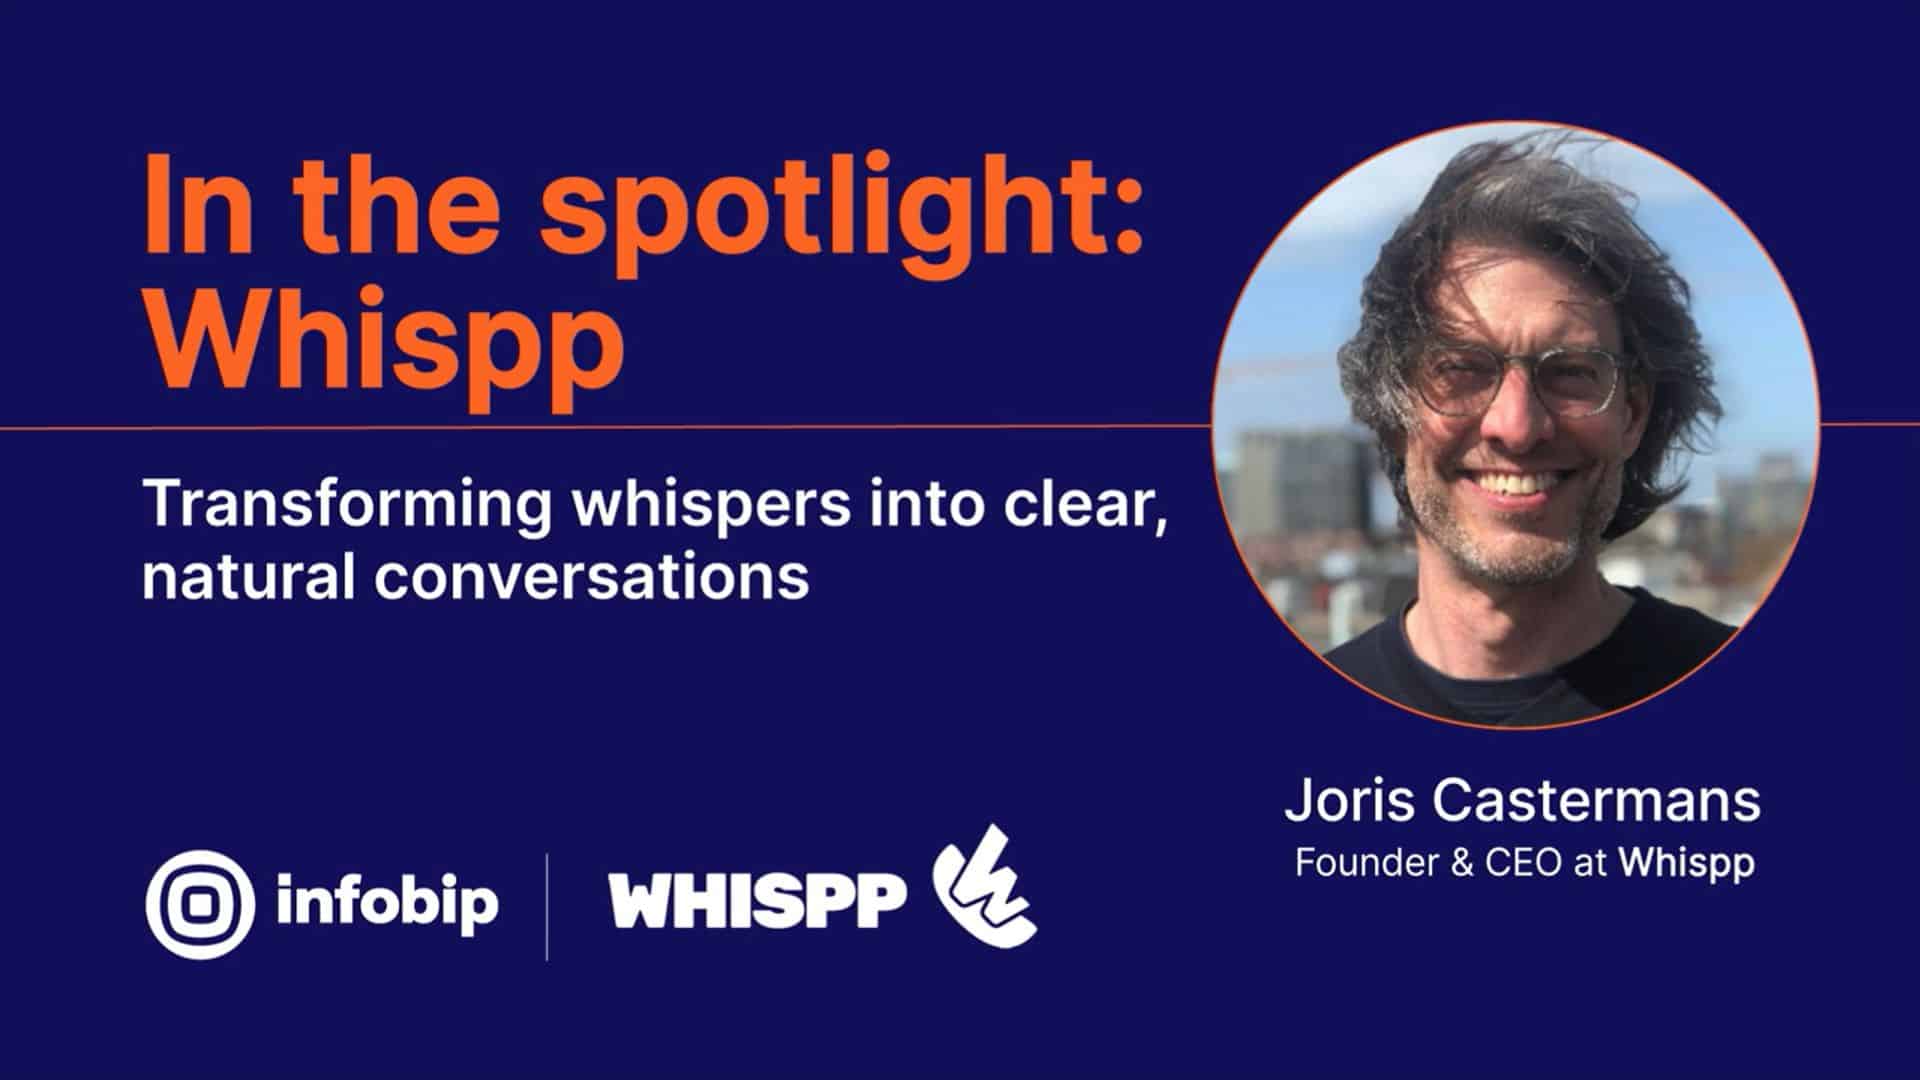 Whispp leveraging AI